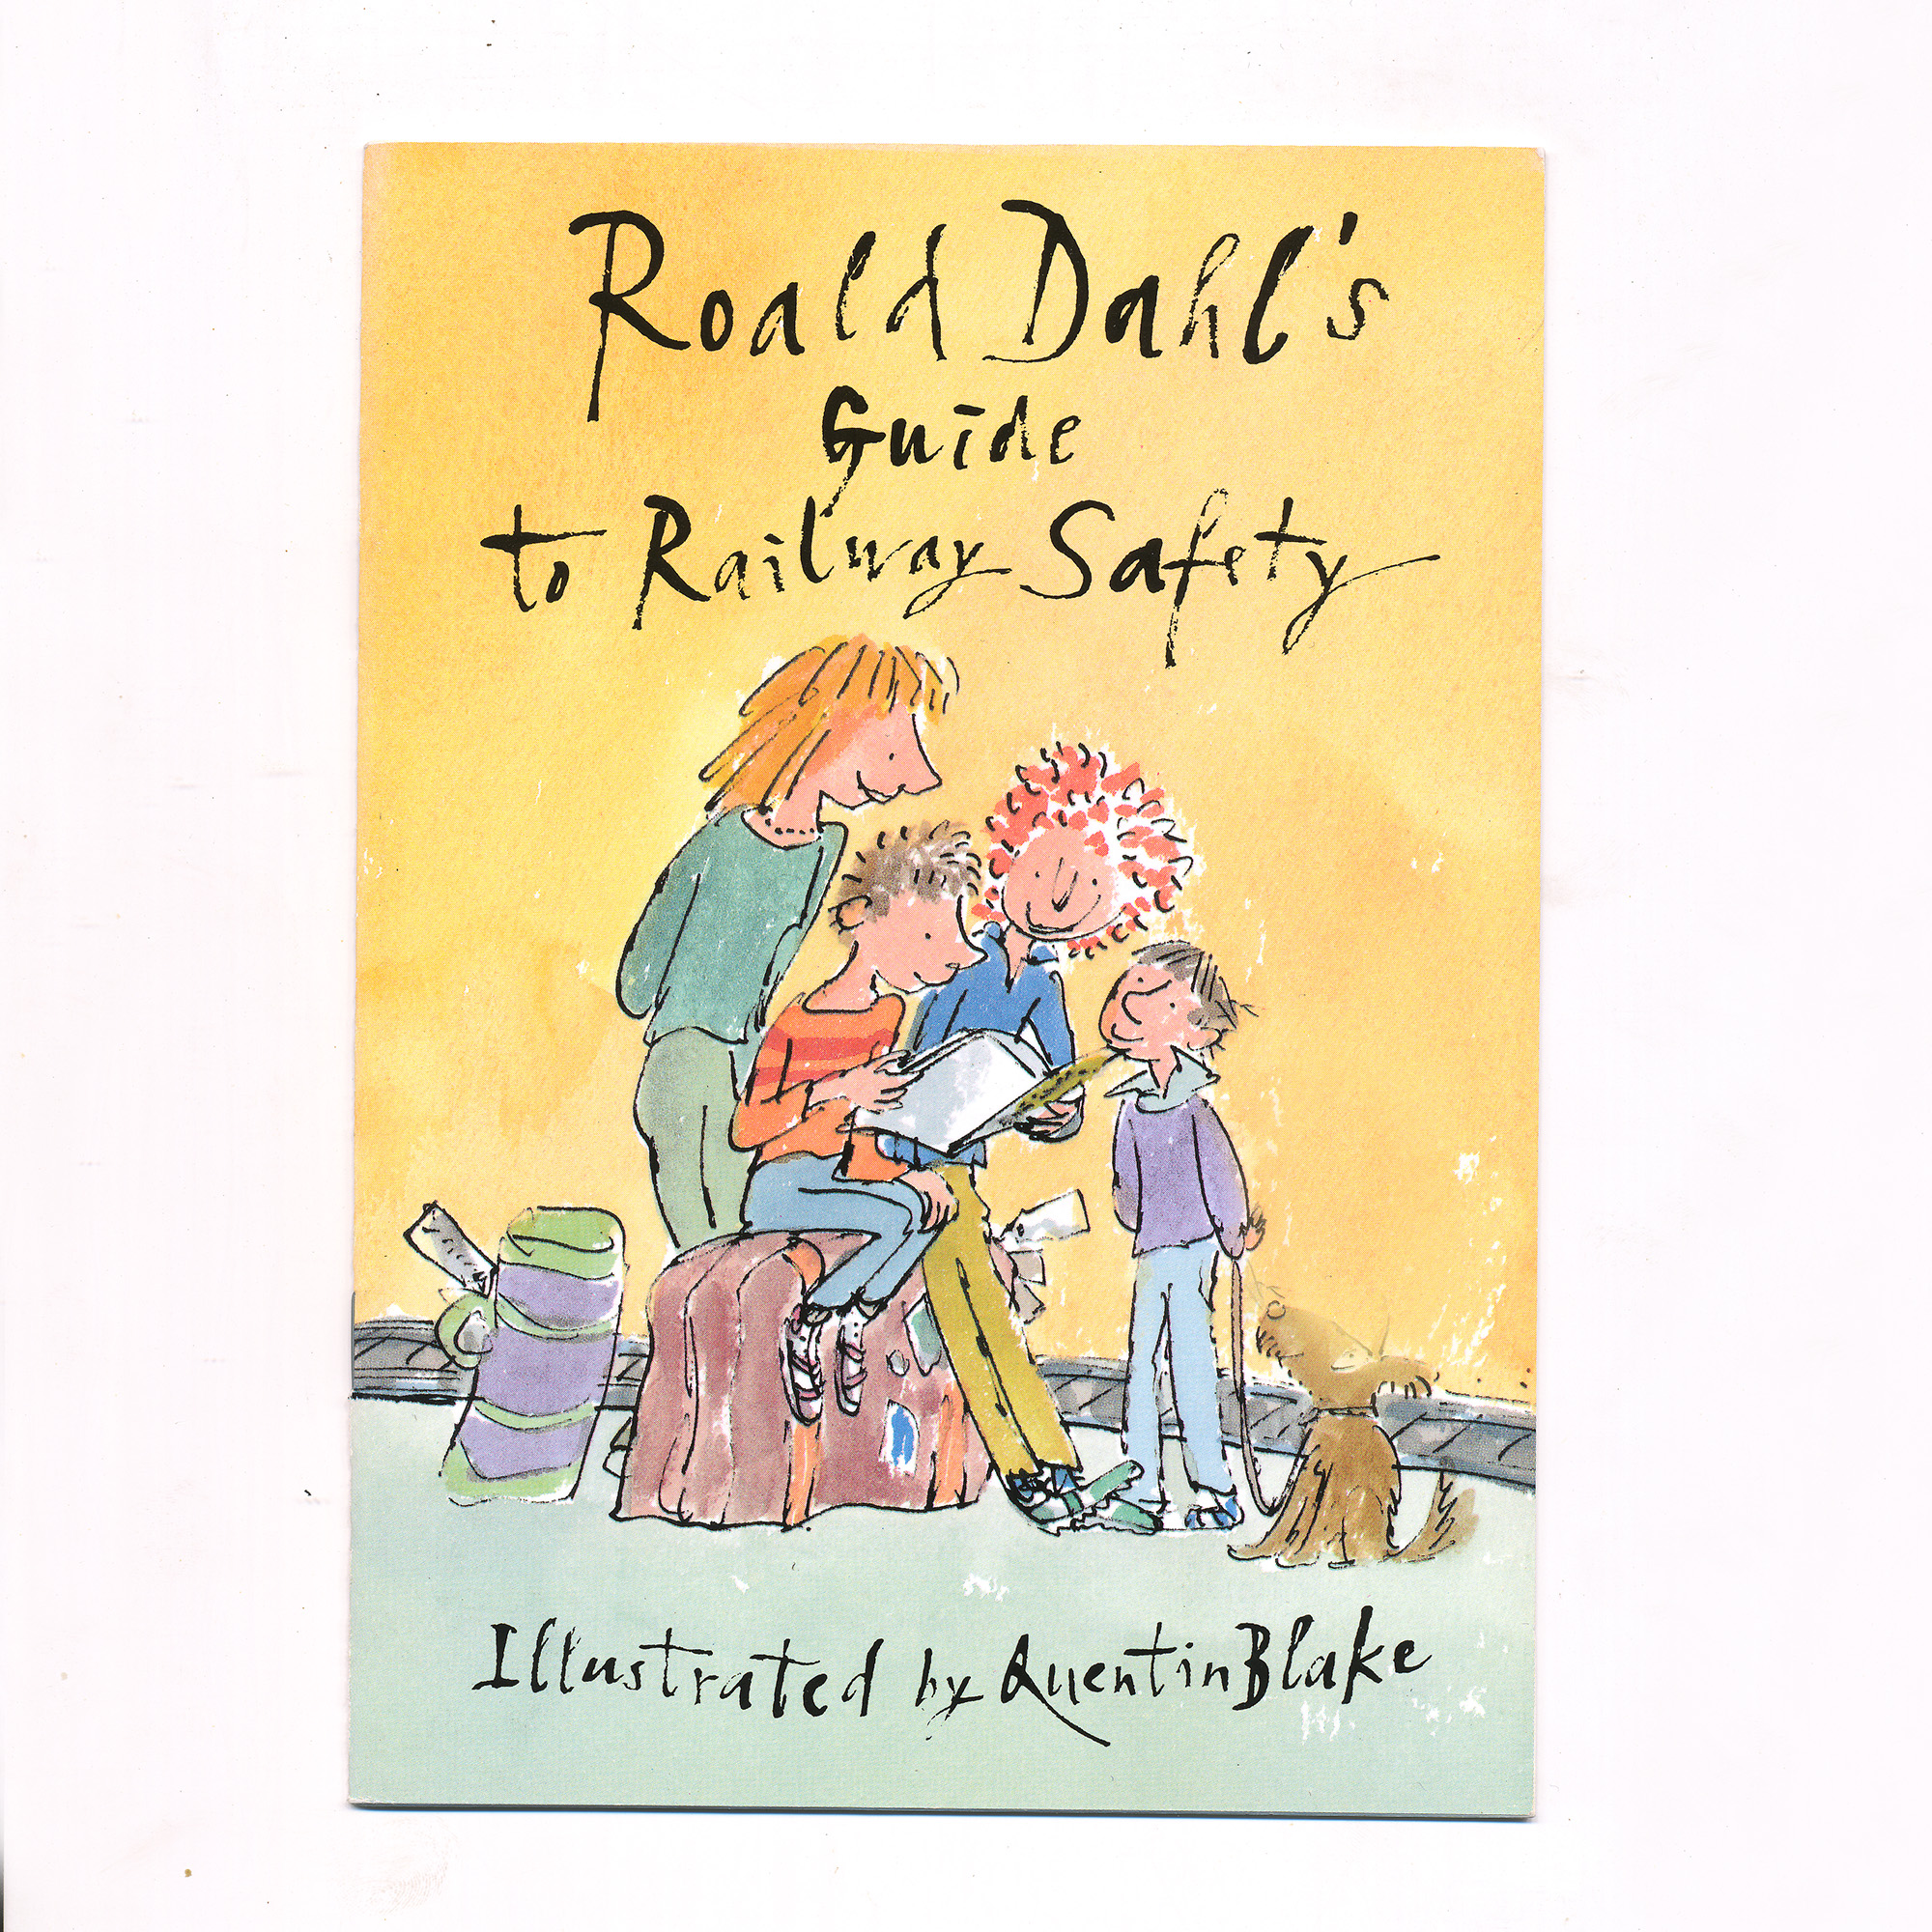 Roald Dahl's Guide to Railway Safety - , 